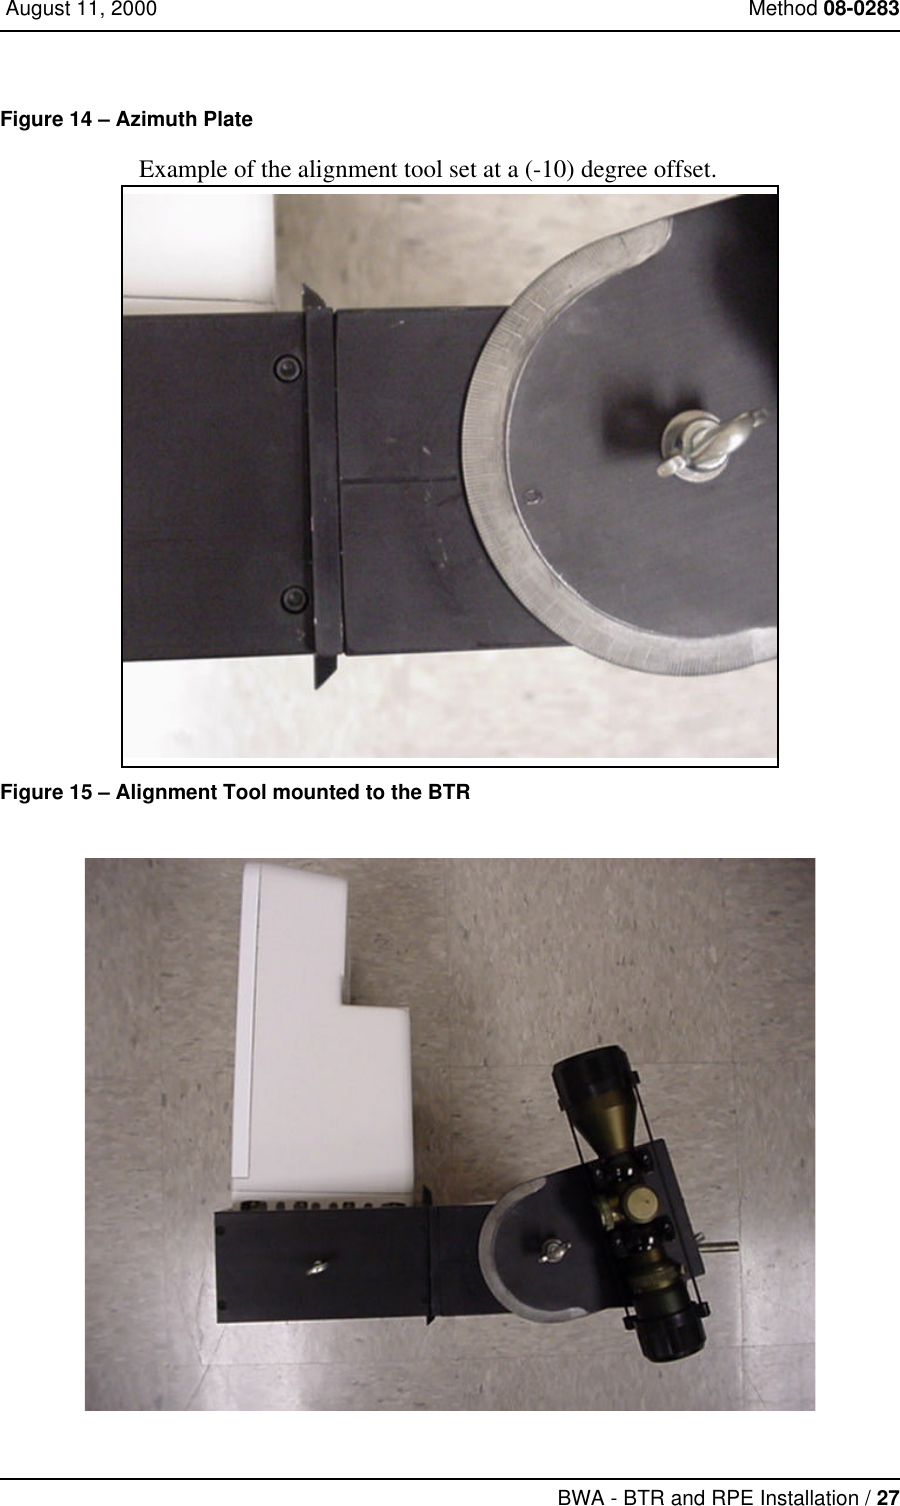 BWA - BTR and RPE Installation / 27 August 11, 2000 Method 08-0283Figure 14 – Azimuth PlateExample of the alignment tool set at a (-10) degree offset. Figure 15 – Alignment Tool mounted to the BTR